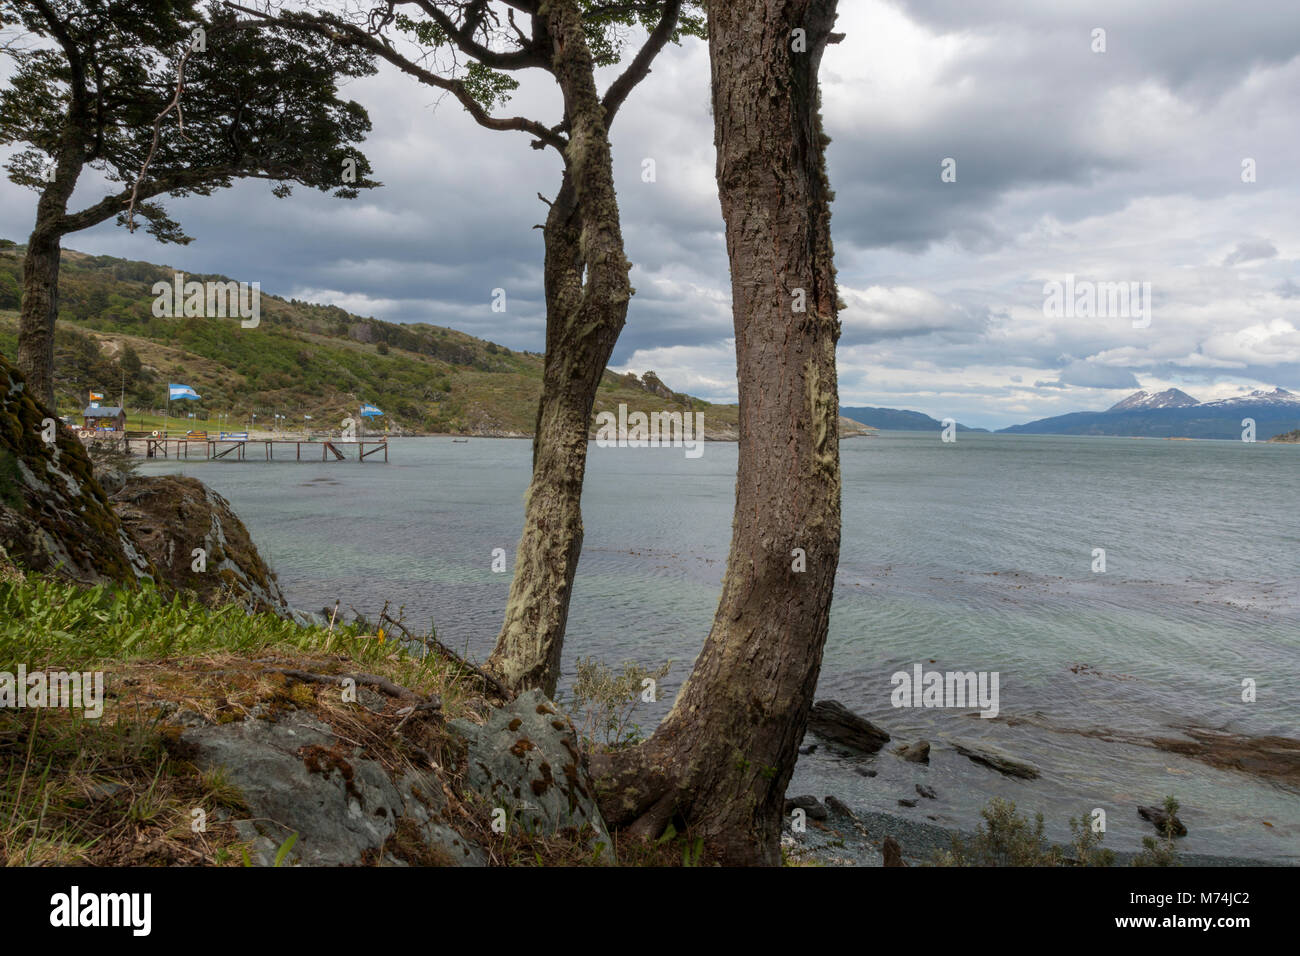 Tierra Del Fuego National Park, Ushuaia Argentina, subantarctic Patagonian forest is popular for tourism, Andes Mountains, boat dock cloudy sky, flag Stock Photo